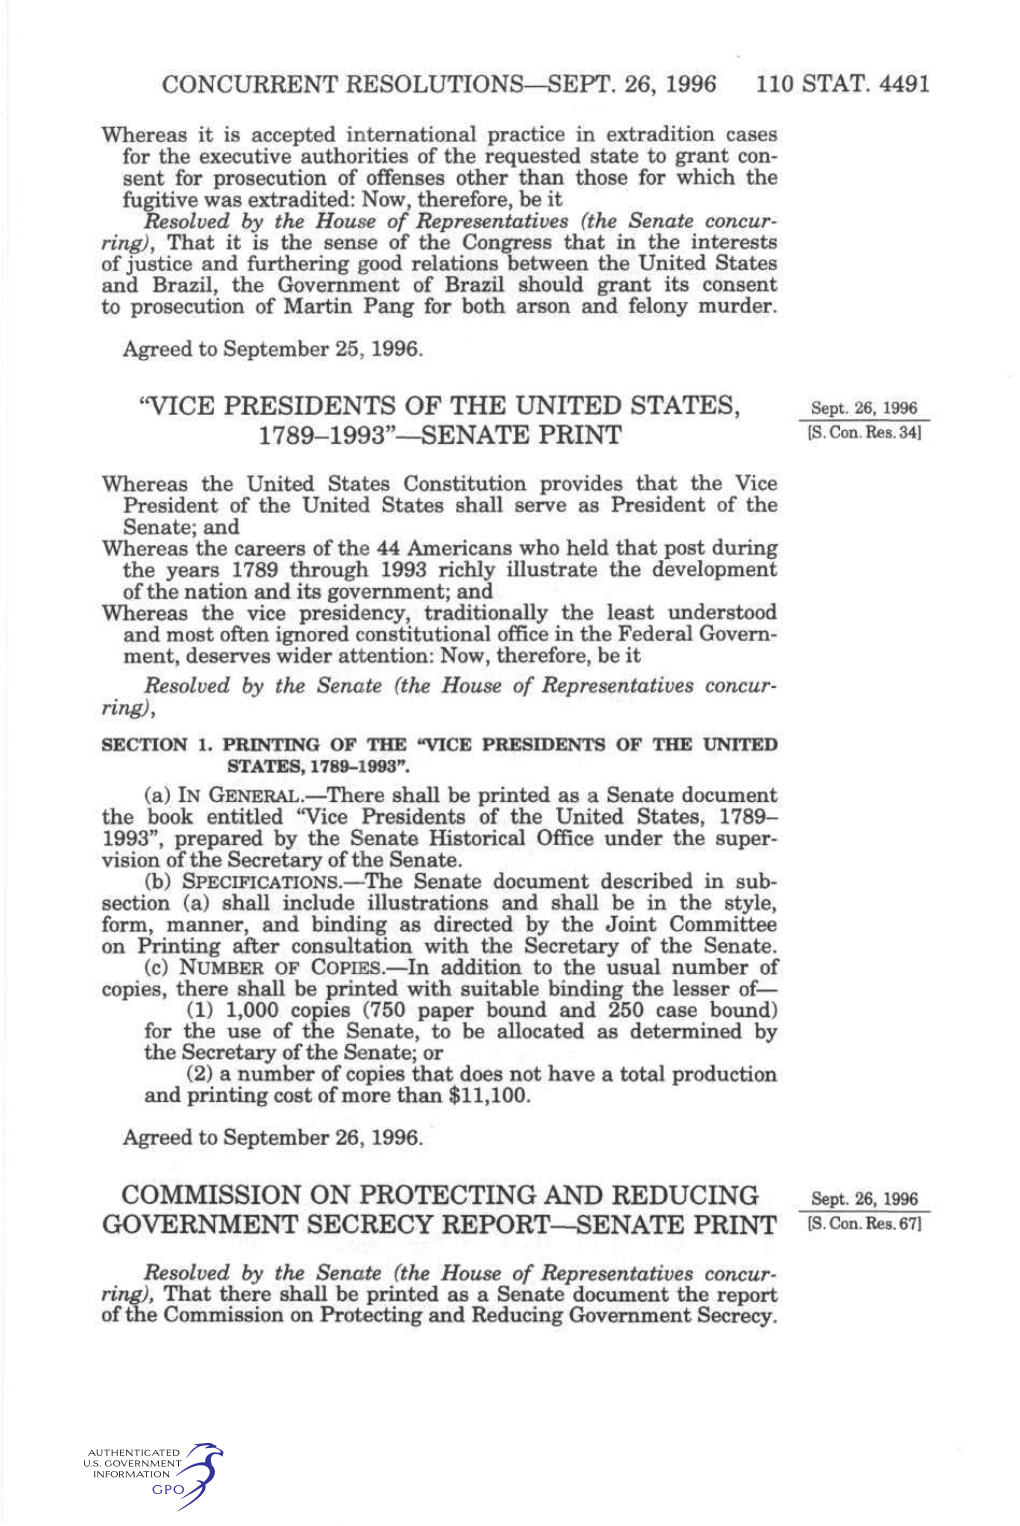 1789-1993"—SENATE PRINT [S.Con.Res.34] COMMISSION on PROTECTING and REDUCING Sept. 26, I996 GOVERNMENT SECRECY REPORT—S